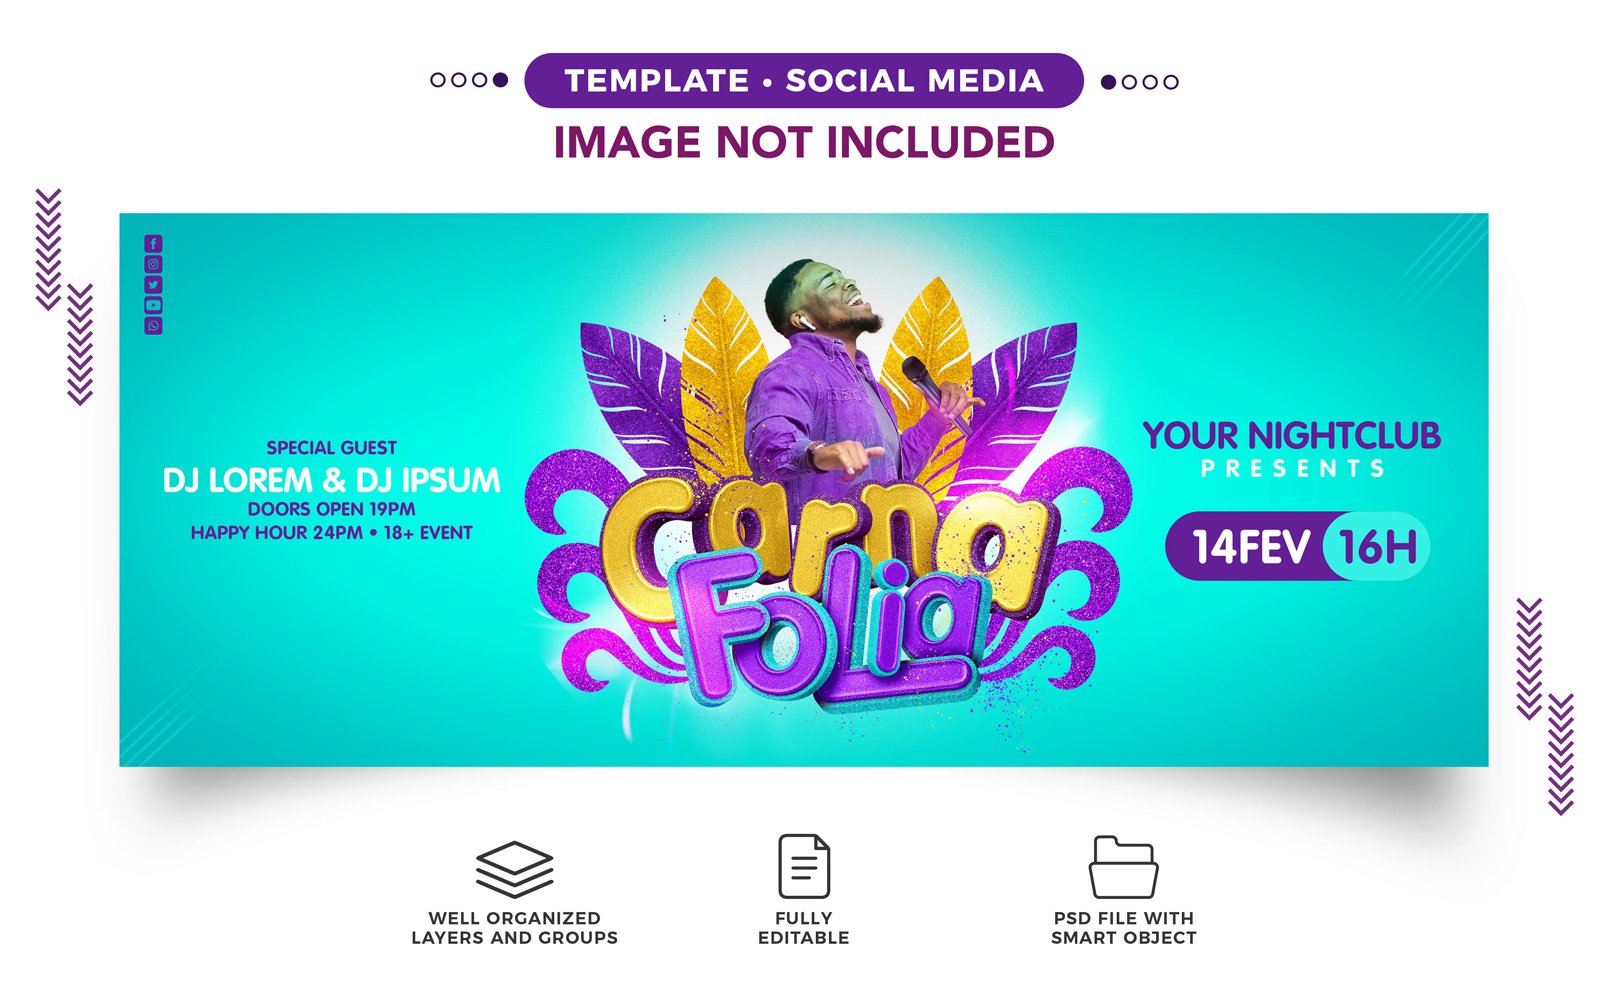 Carna Folia For Carnival Events Social Media Banner - Purple and Gold Theme